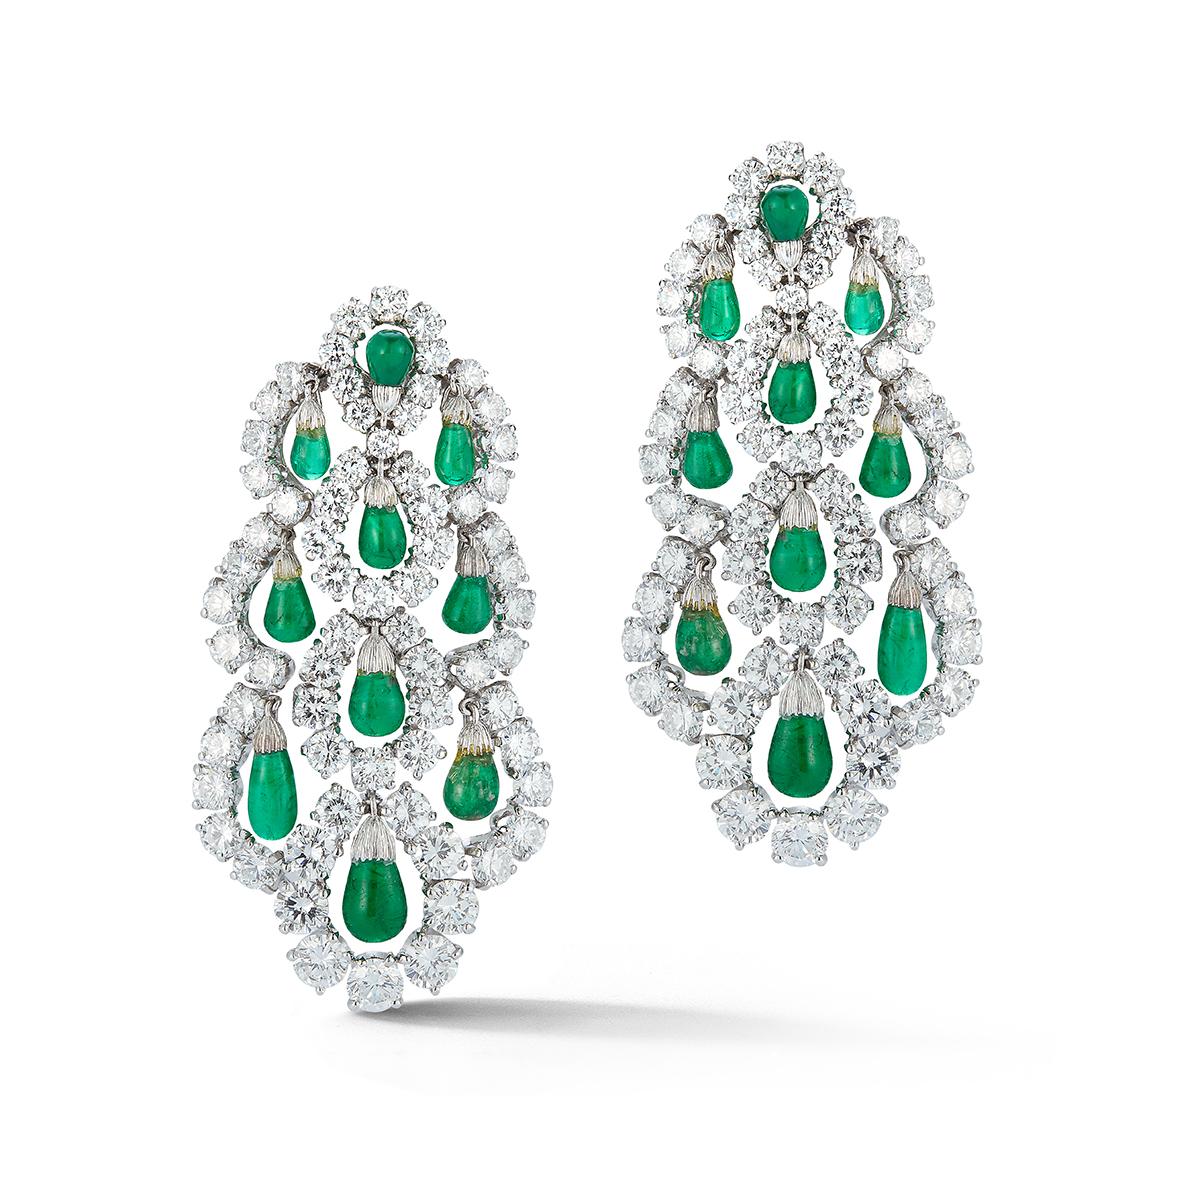 Van Cleef & Arpels Dangling Emerald & Diamond Earrings
Large size: Measurements :2 1/8 inches by 1 1/8 inches 
Superbly made: the emeralds dangle/dance within the diamond frame- amazing craftmanship to see in person.
App Diamond weight: 11.00 cts.